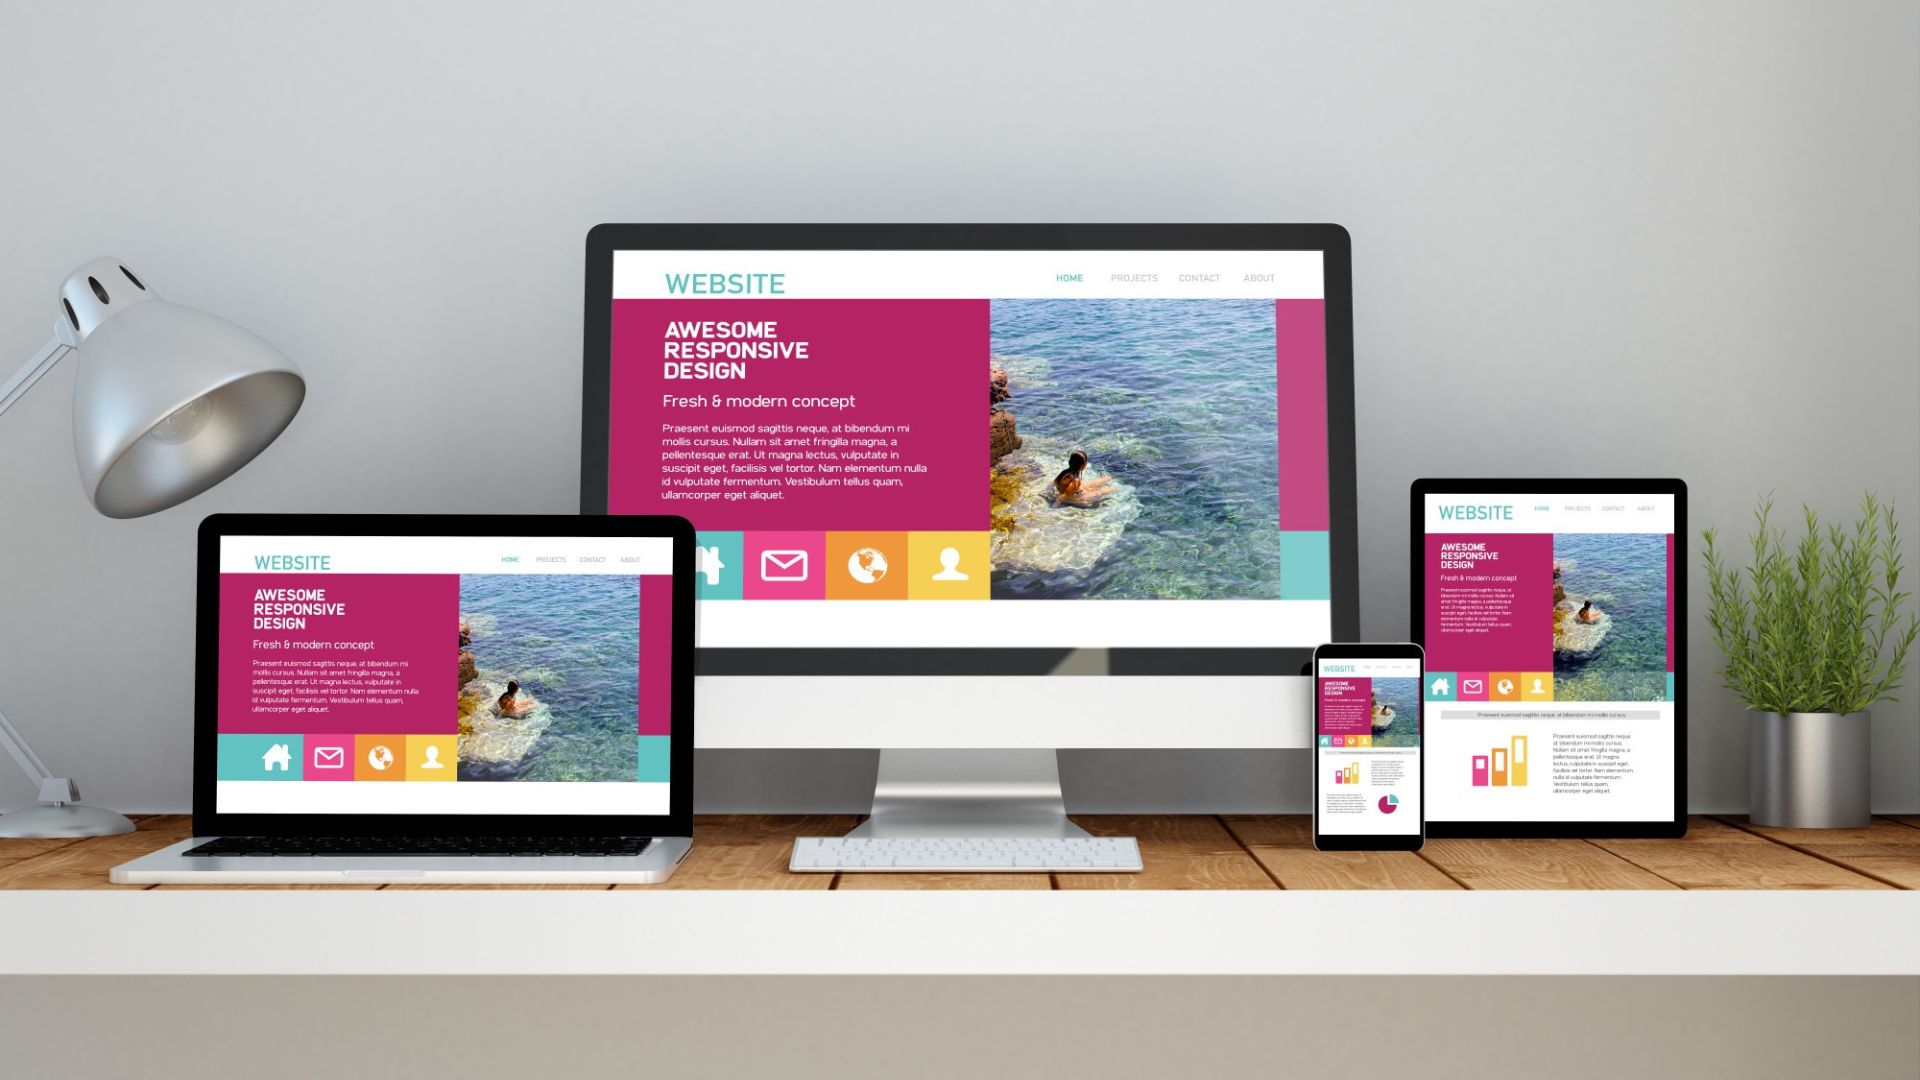 Picture showinf a responsive website to phone, laptop and Desktop